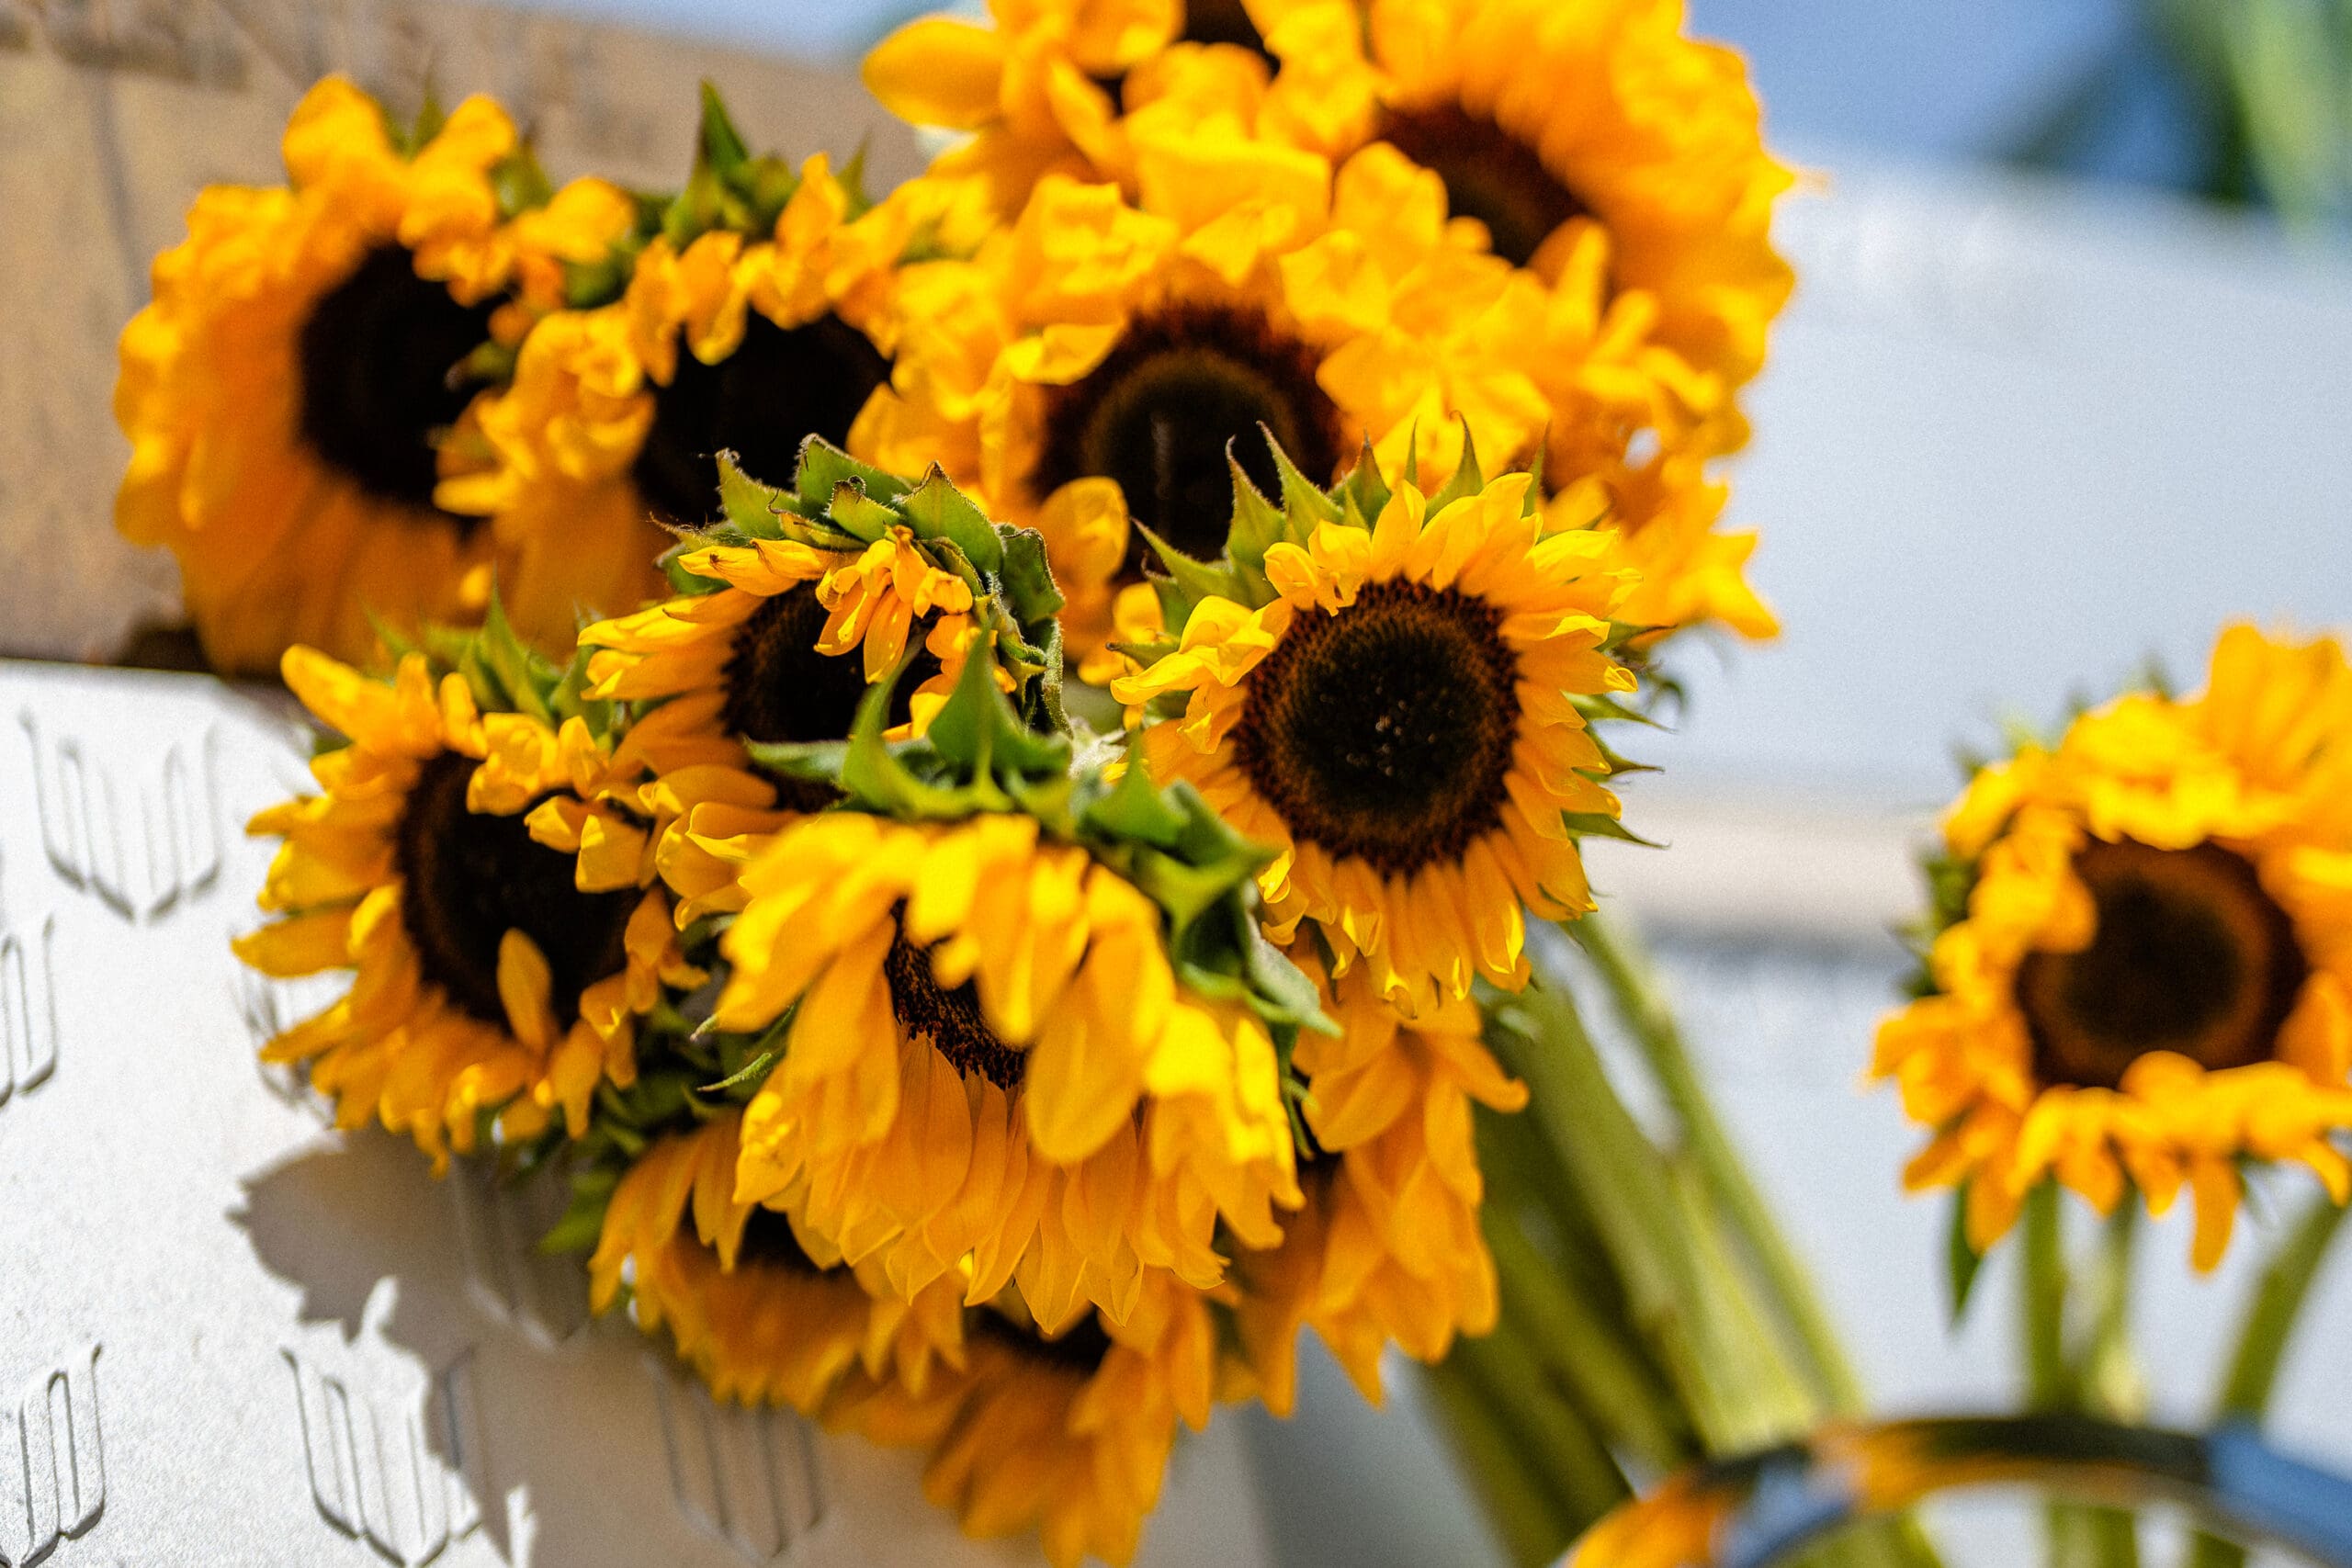 Closeup image of a bouquet of sunflowers.